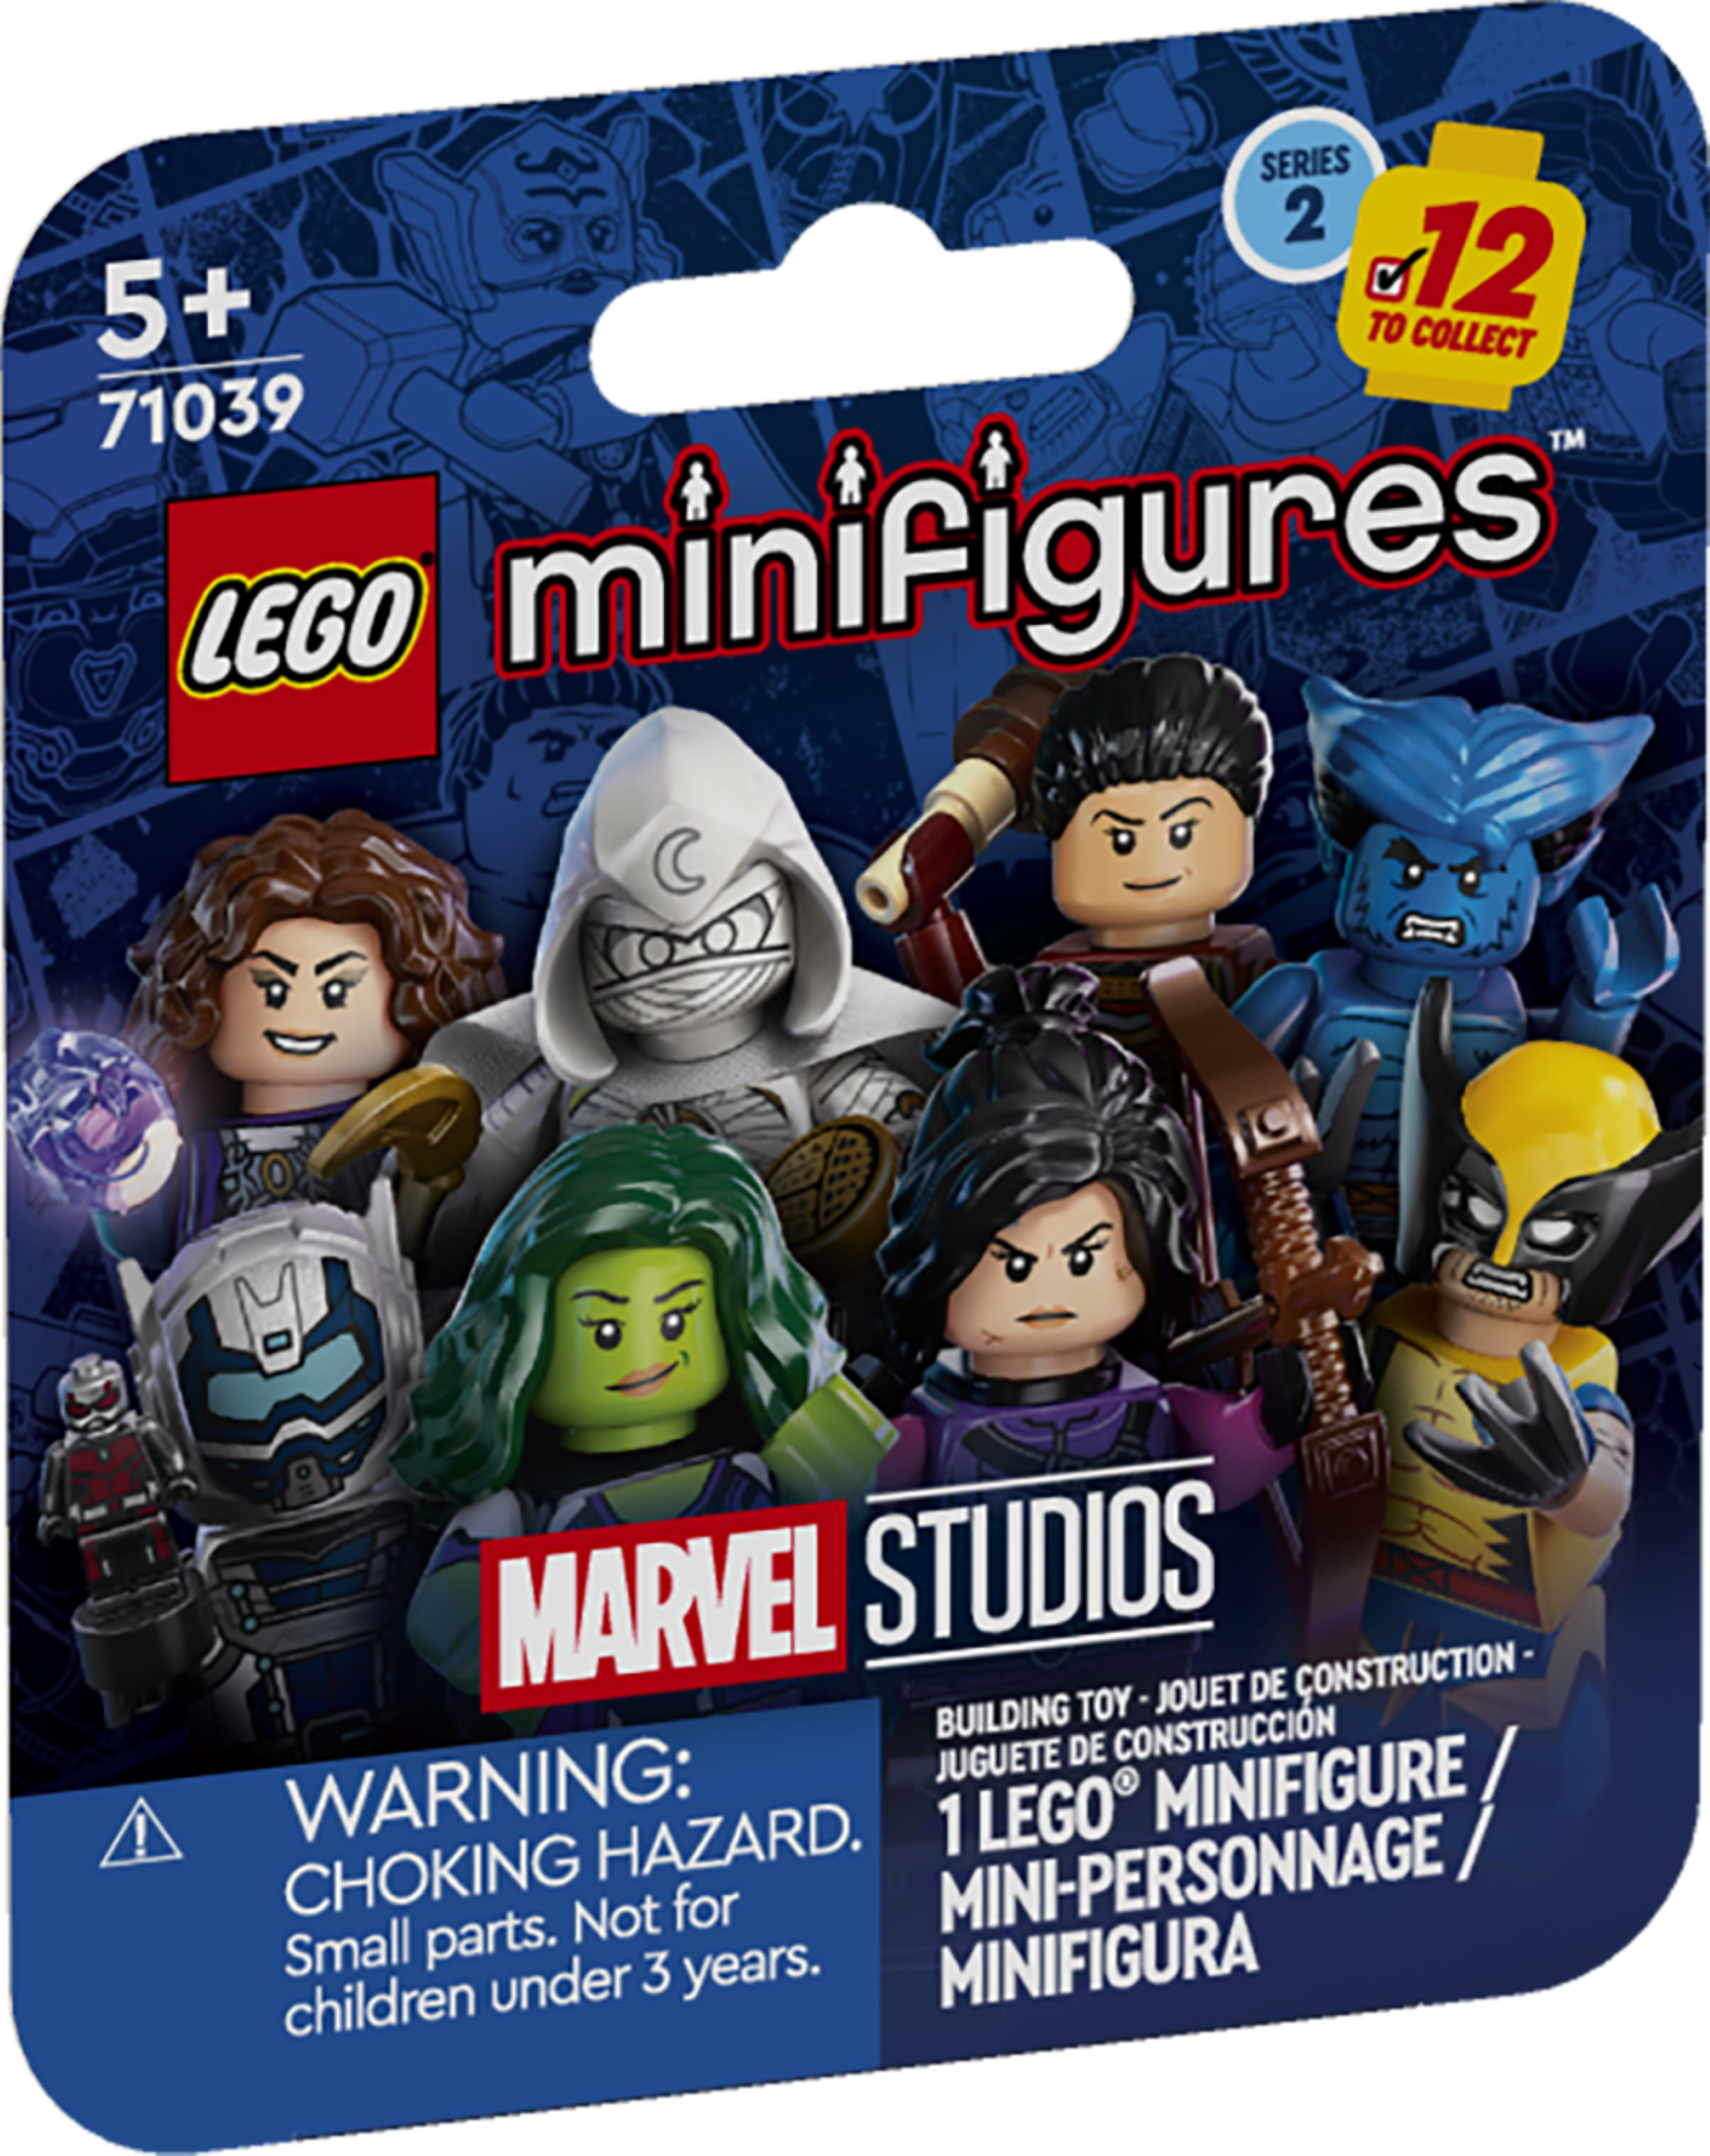 Buy Lego Mini Blind Bags  UP TO 55 OFF